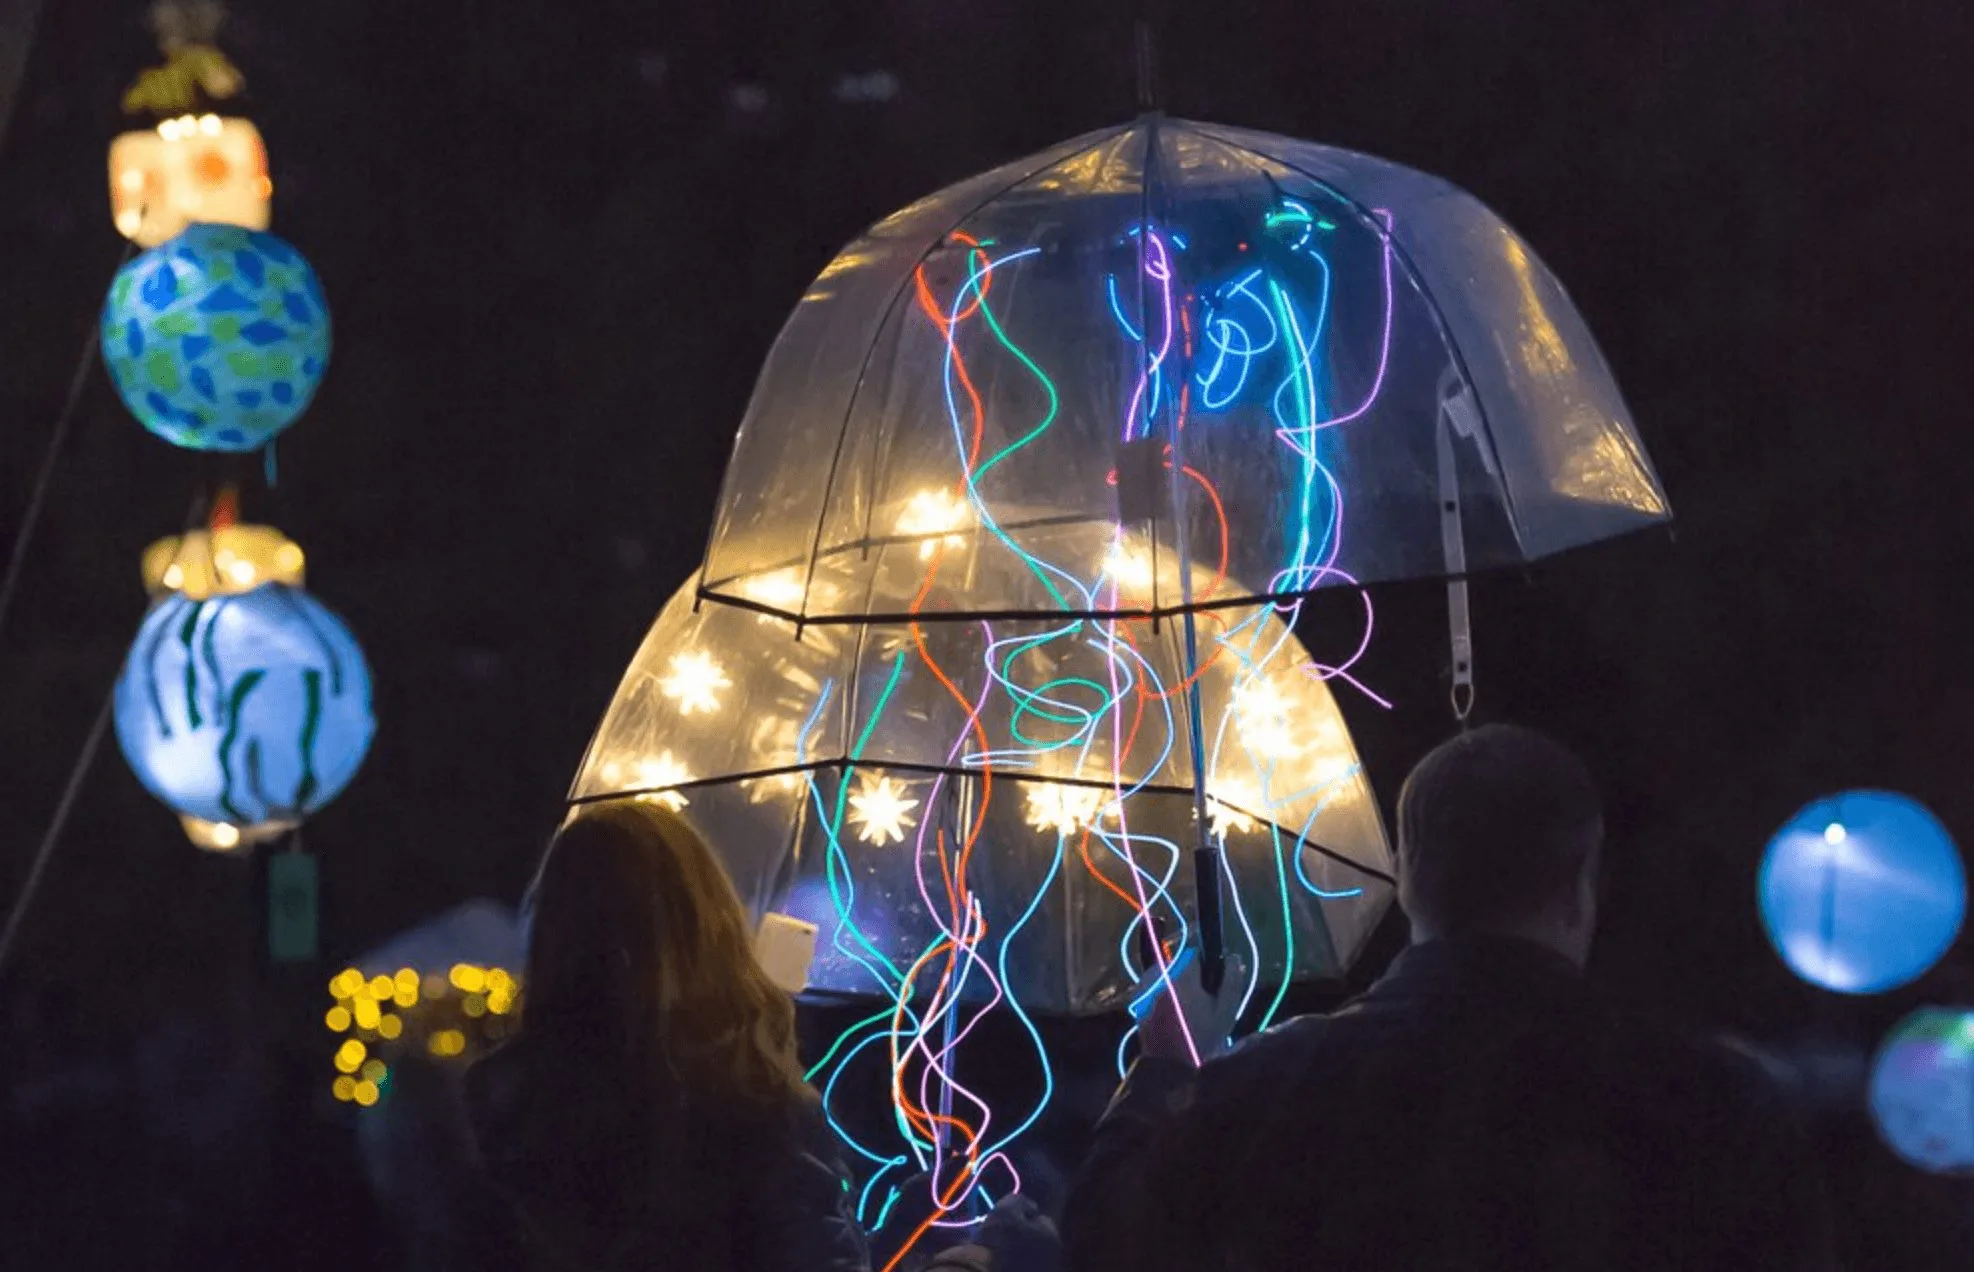 A colorful lightshow at the annual Luminata, featuring people holding umbrellas with bright string lights